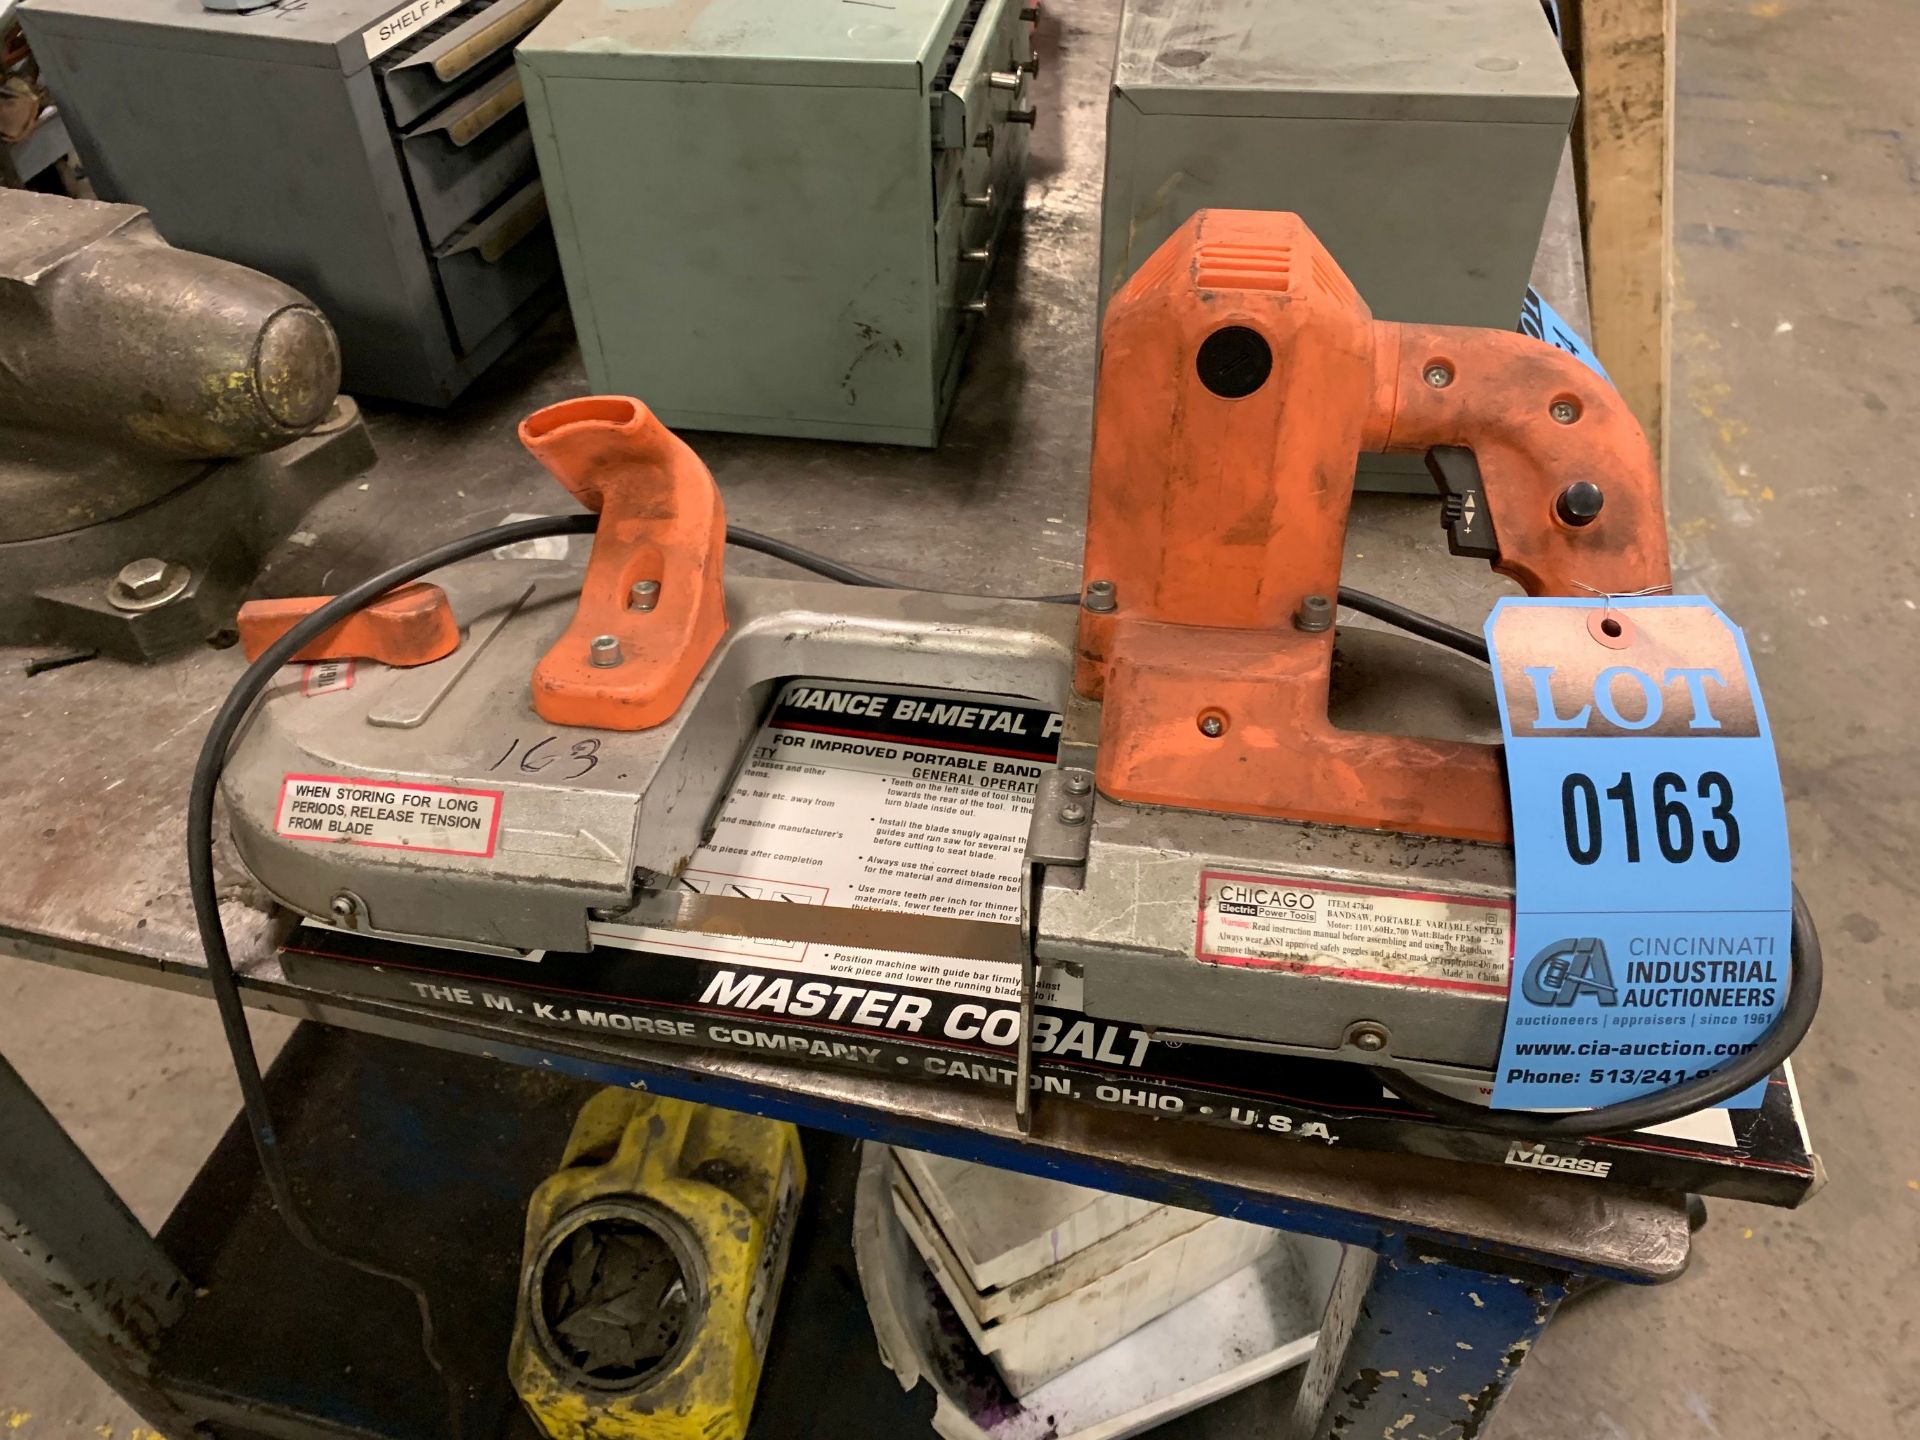 6" CHICAGO ELECTRIC PORTABLE BAND SAW